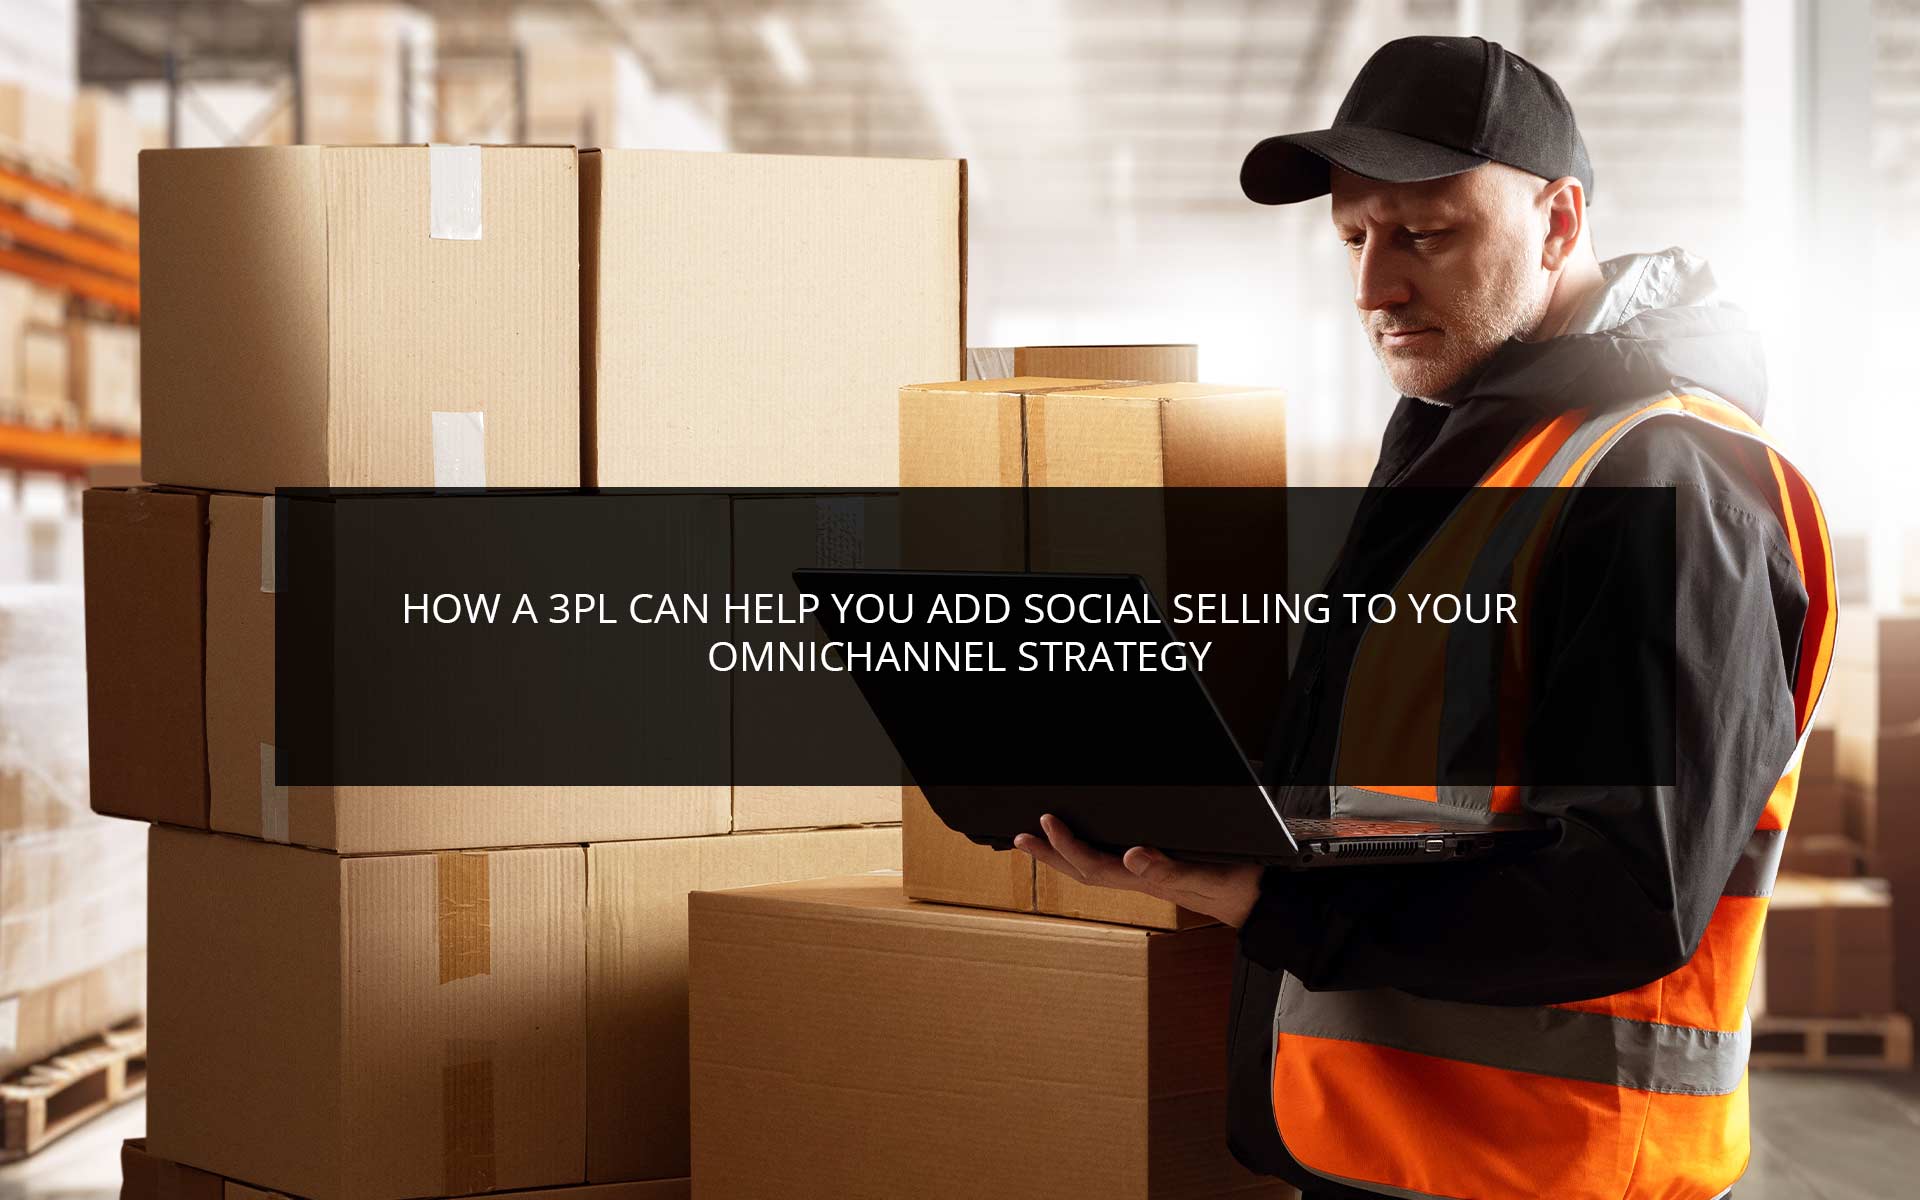 How a 3PL Can Help You Add Social Selling to Your Omnichannel Strategy